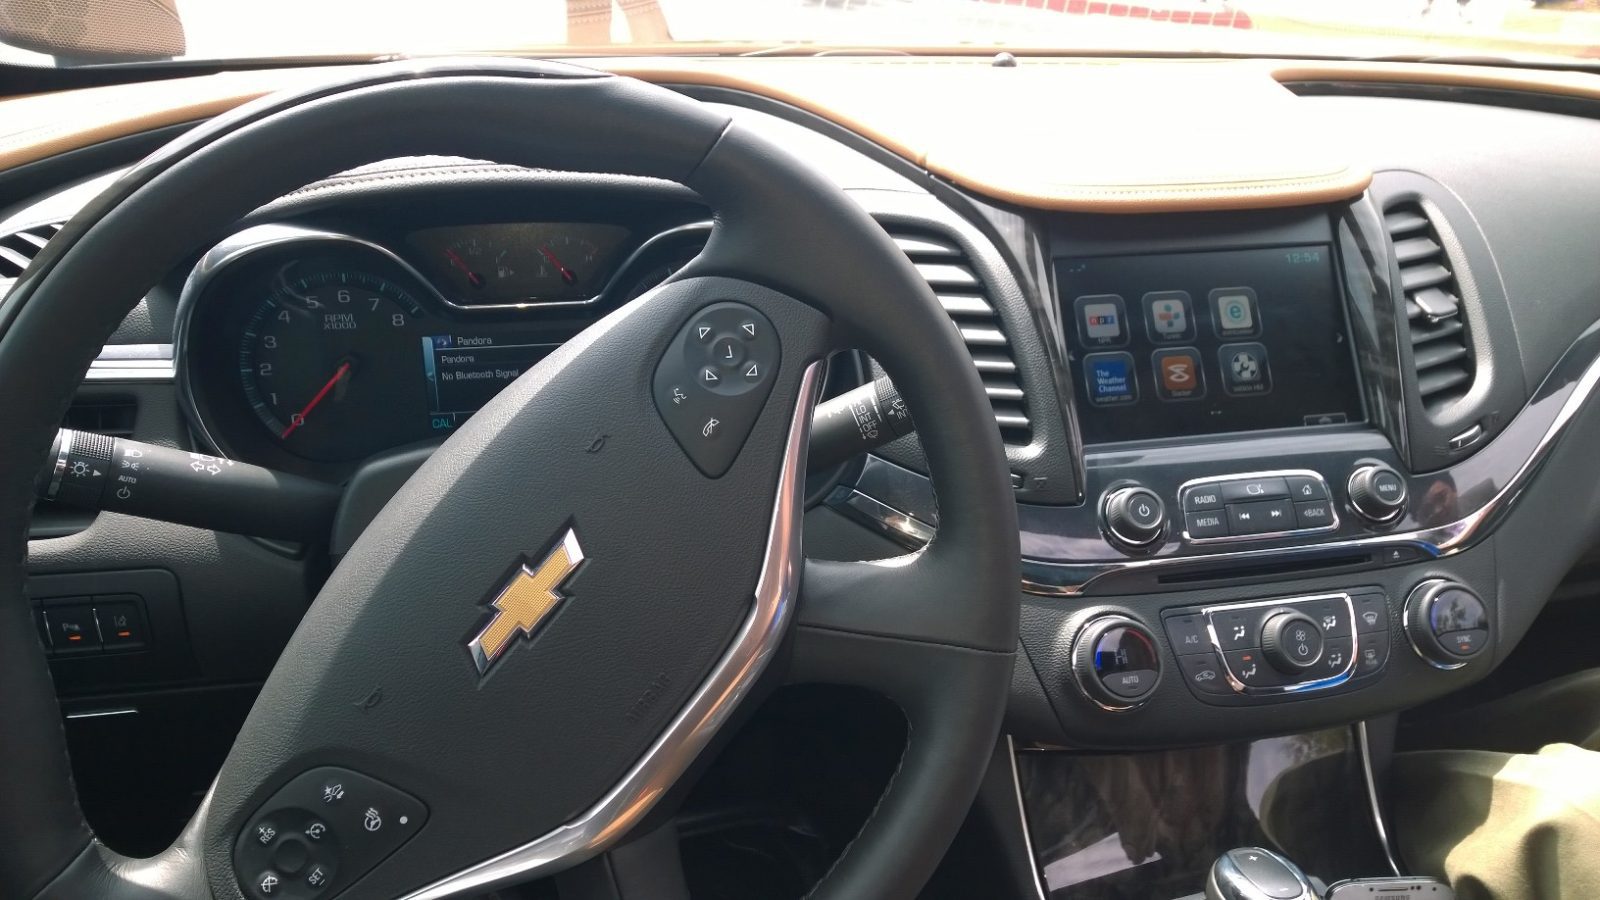 Chevy Connectivity Beats Music